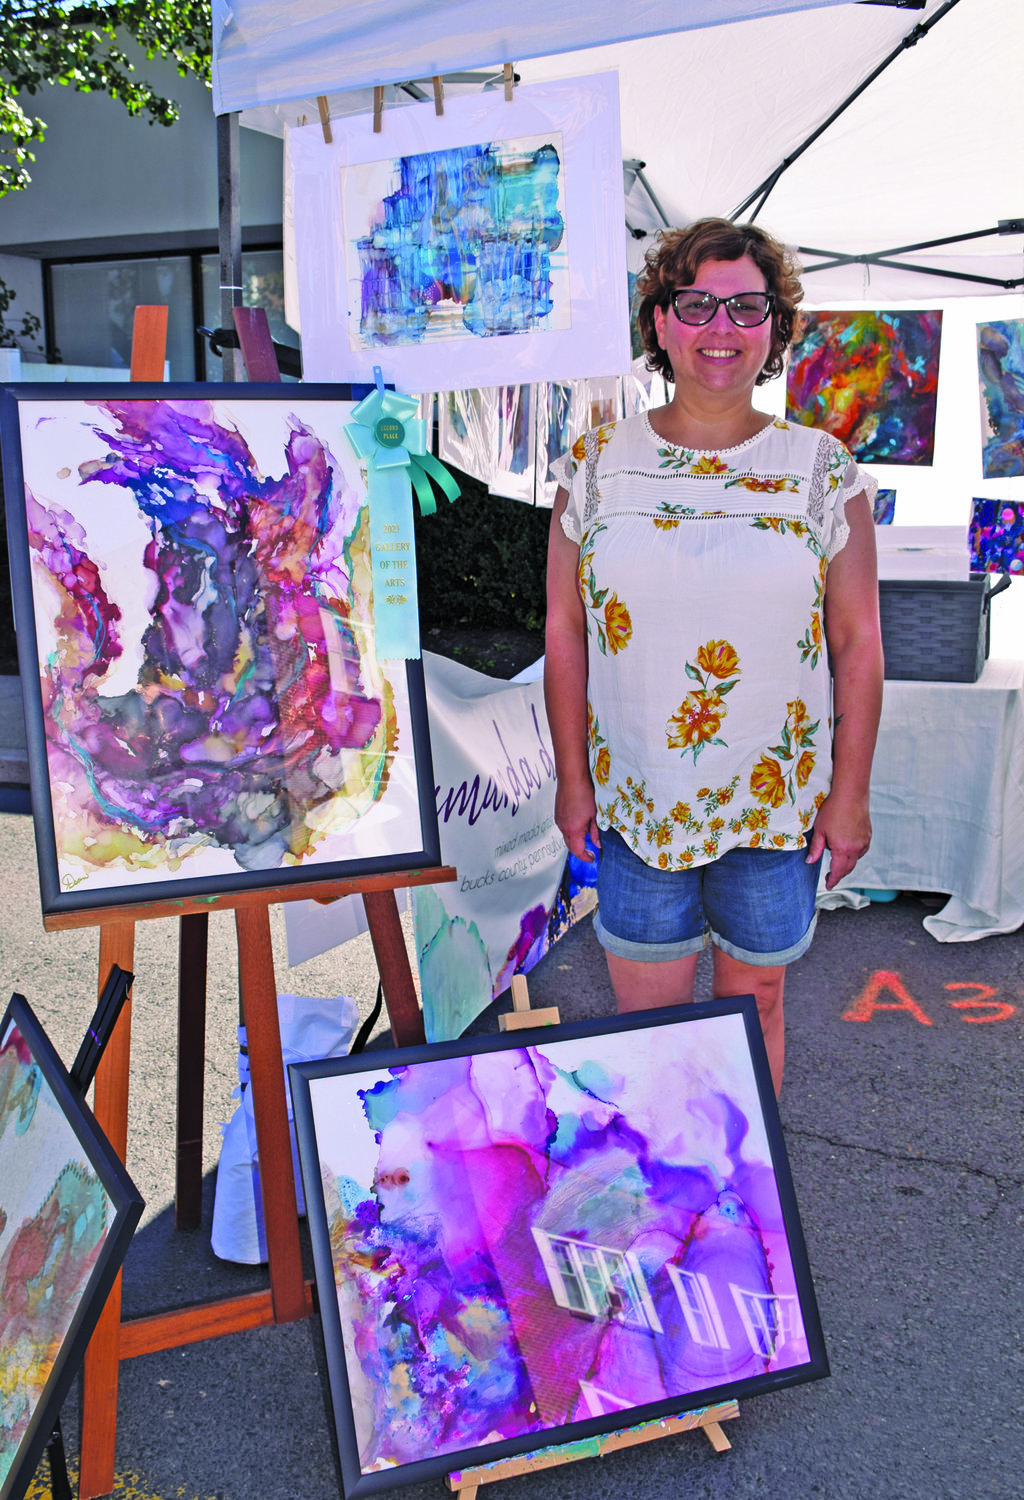 Amanda Dean won second place in Painting for “Summer Bloom.”